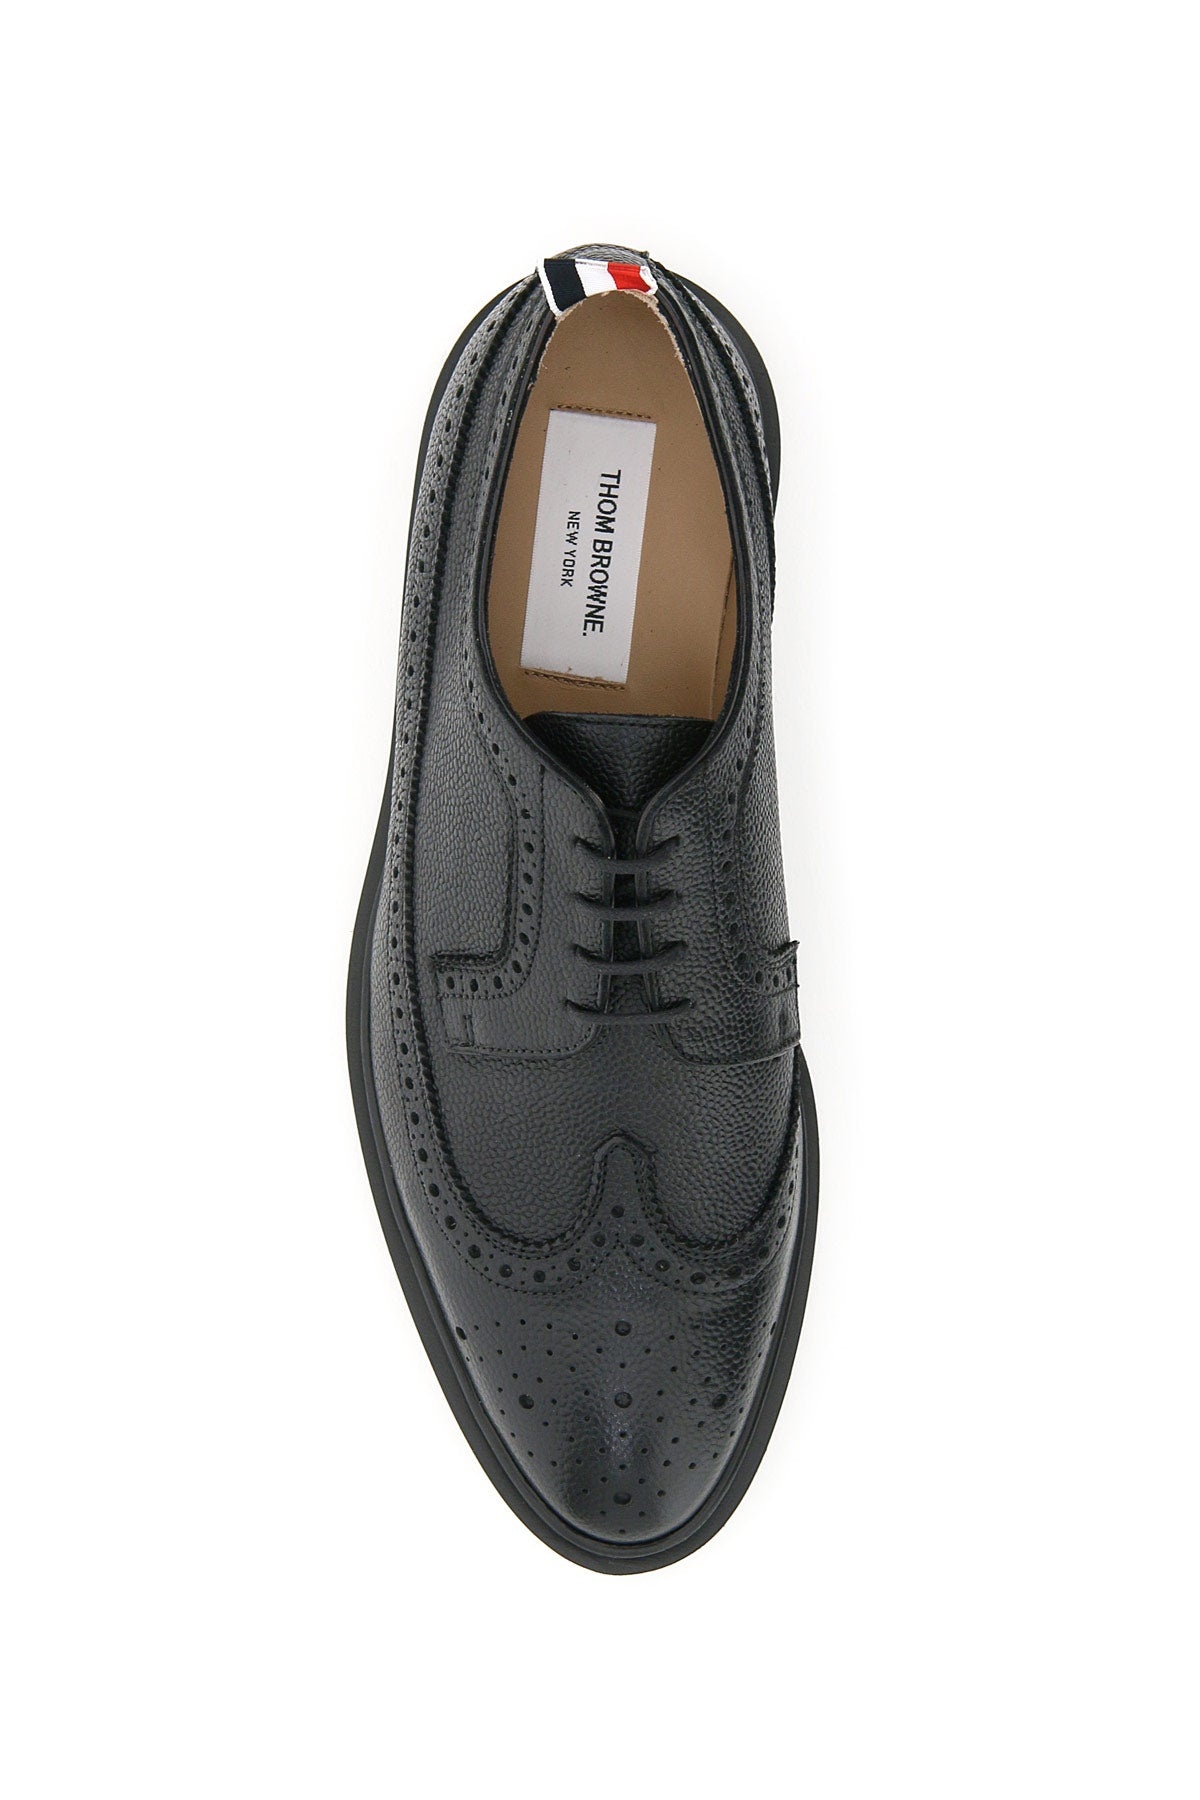 Longwing Brogue Lace Up Shoes - 2